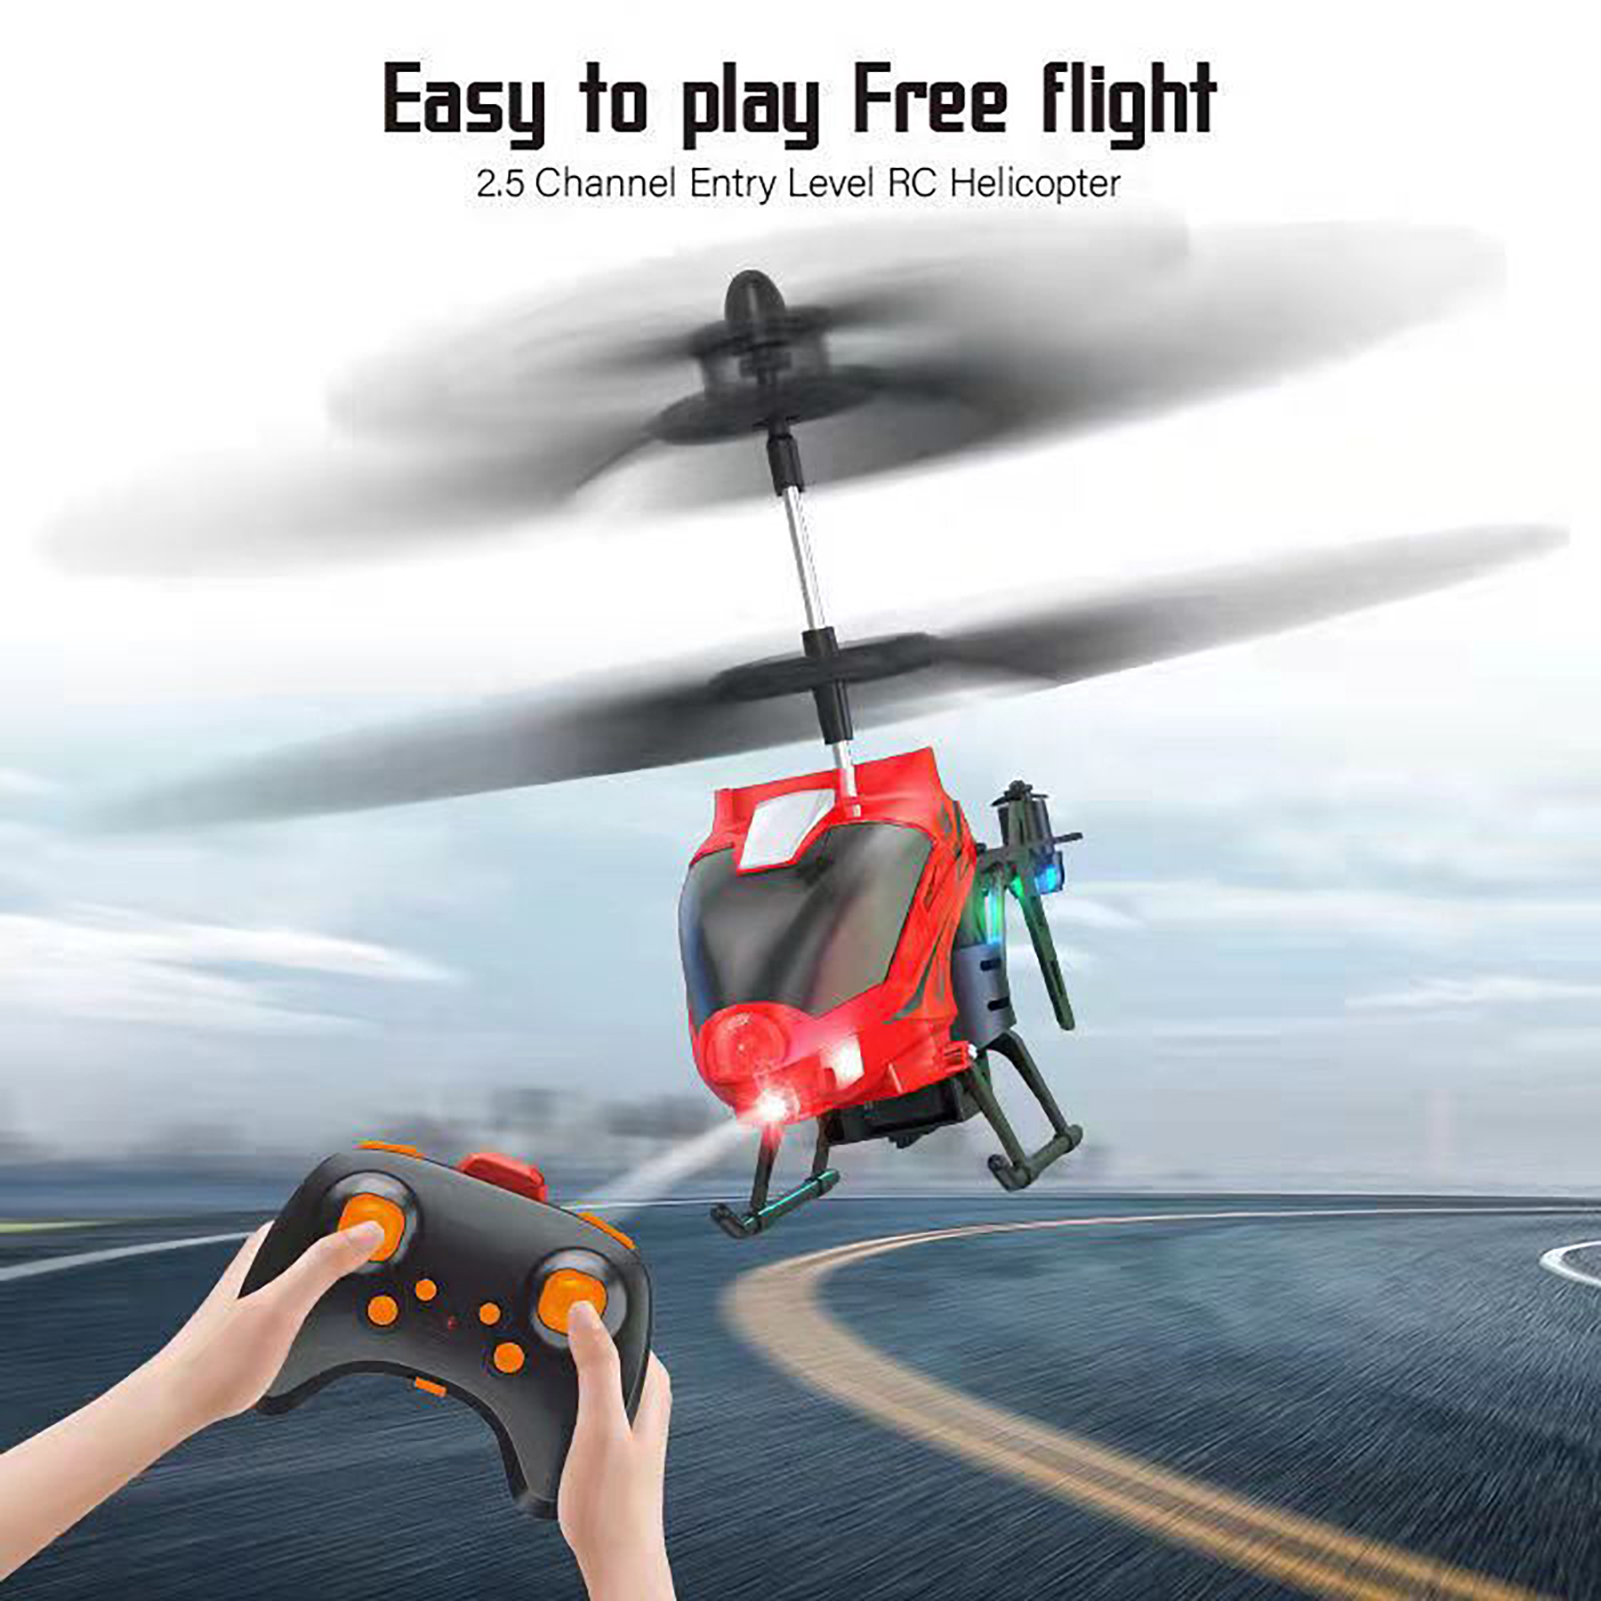 Remote Control Airplane Compact Size Aircraft Mini Rc Helicopter Toy with